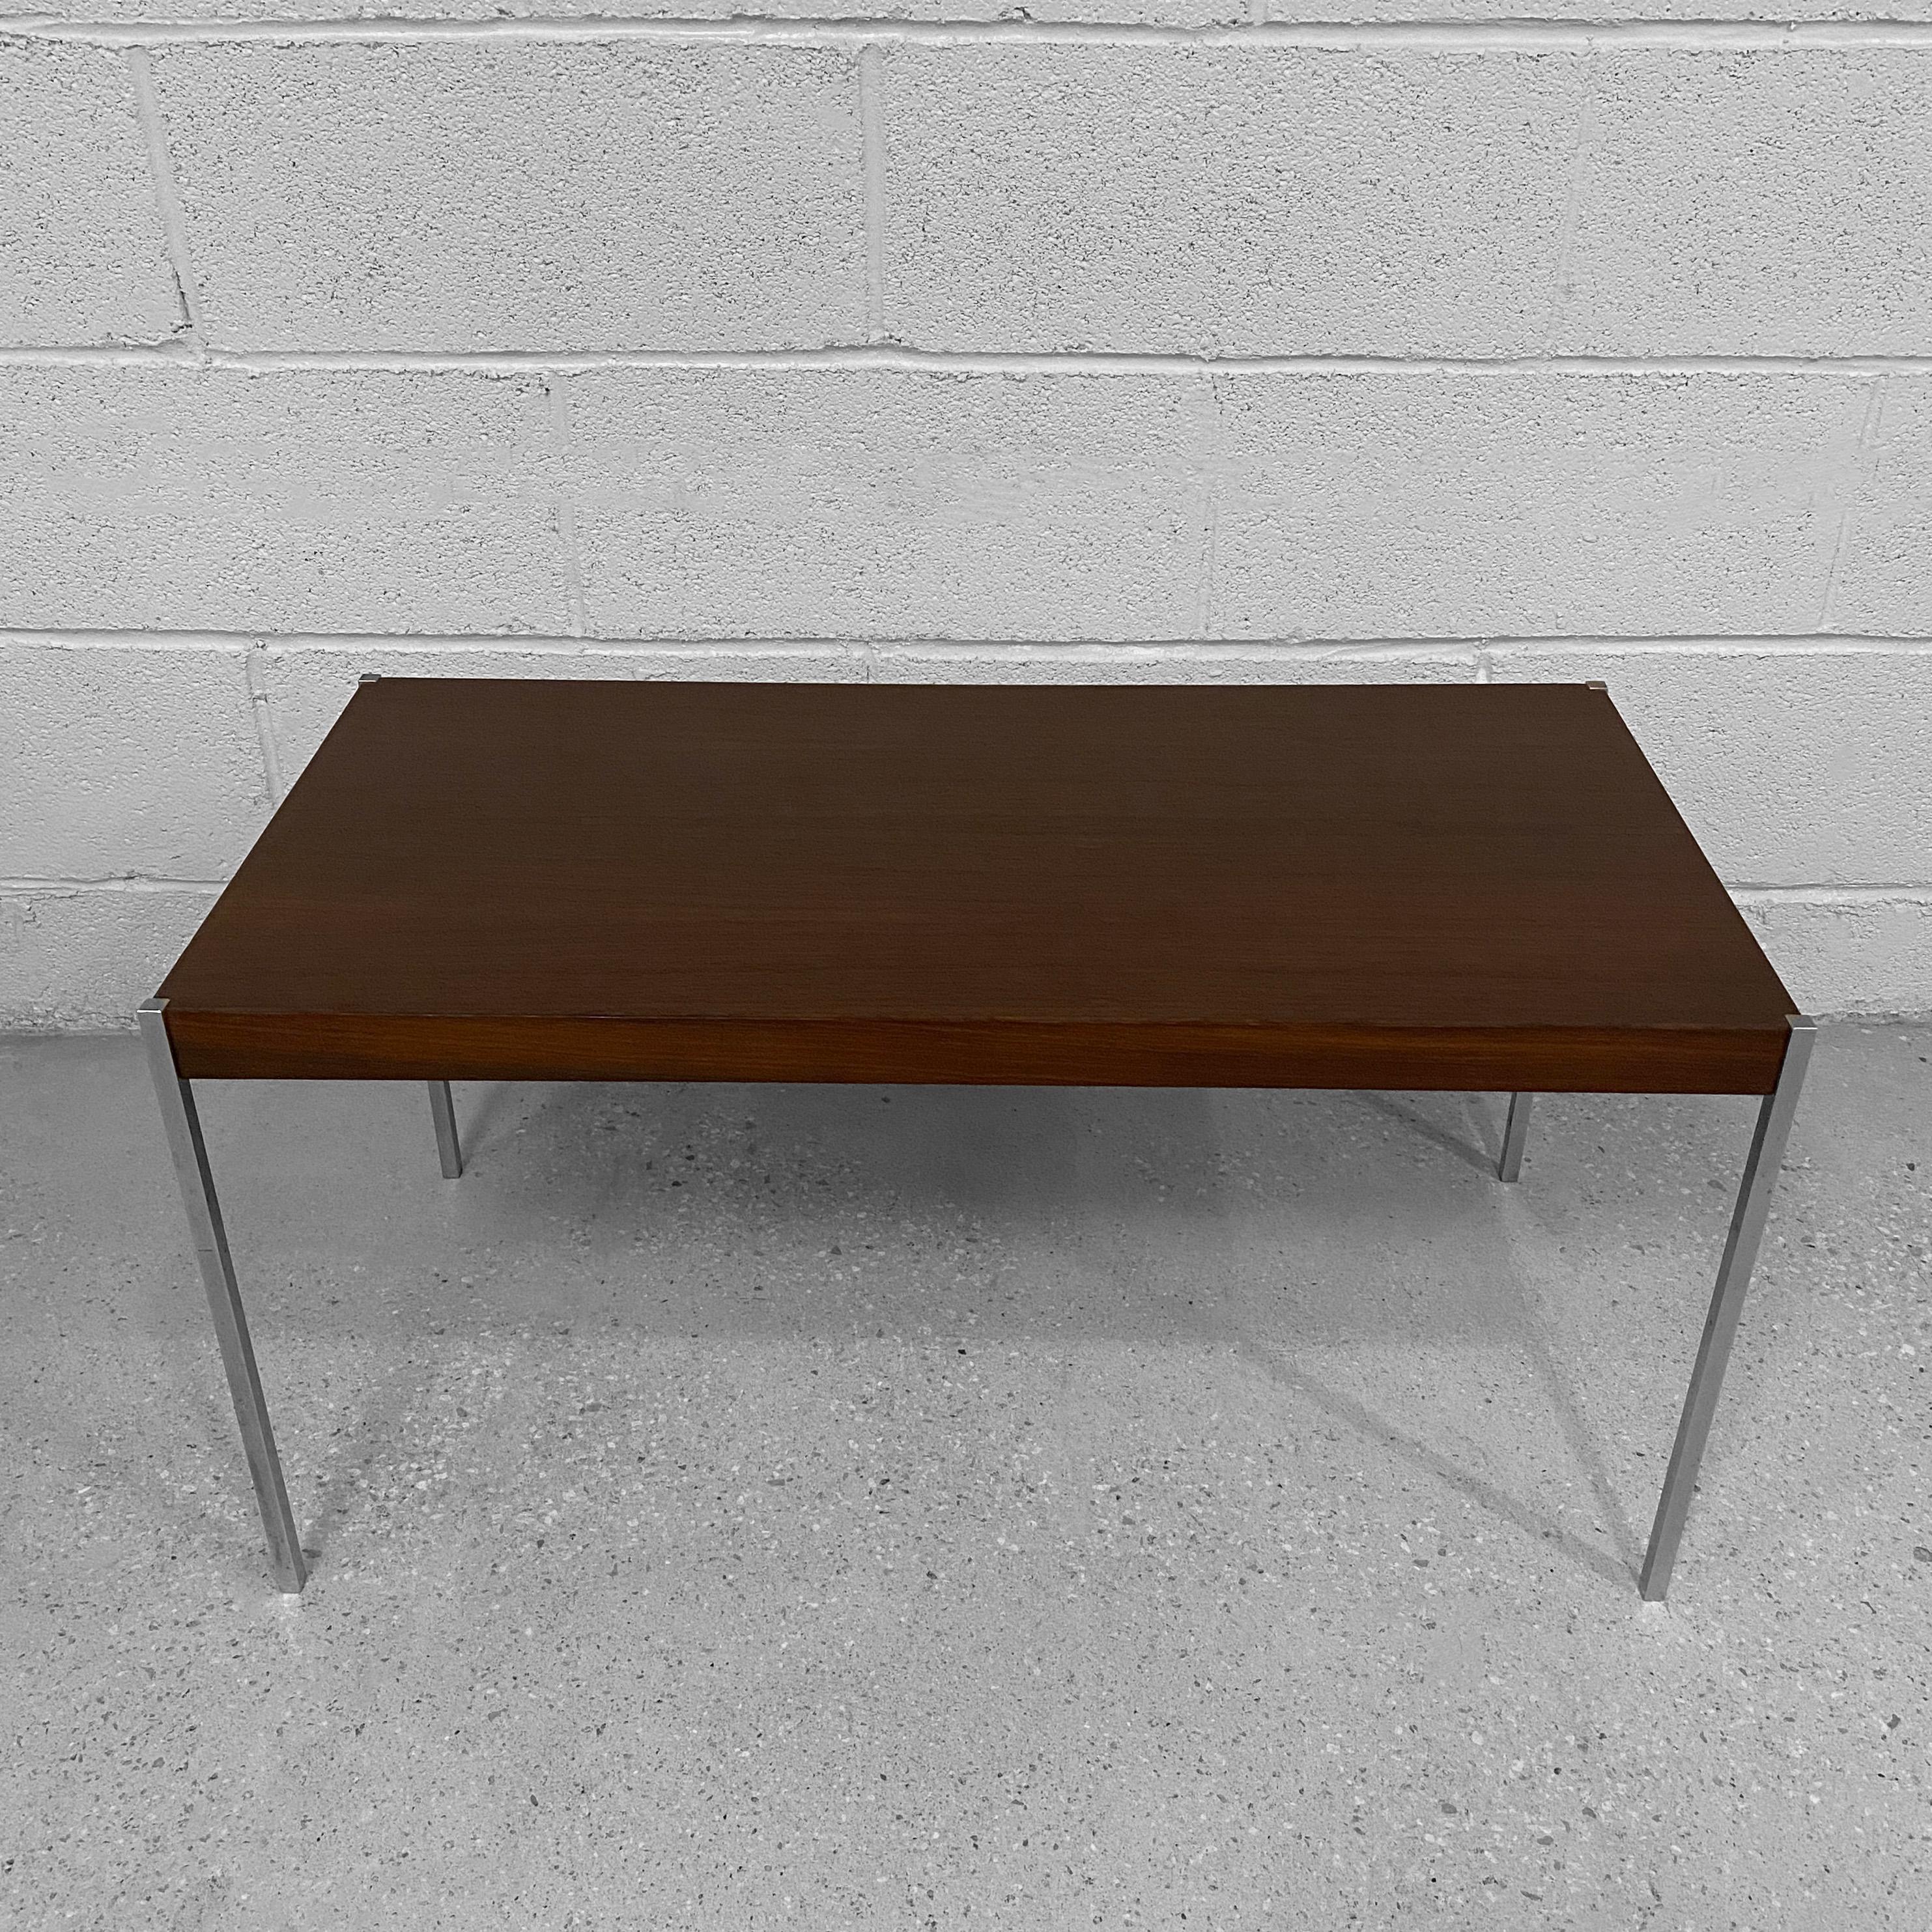 20th Century Rosewood & Steel Coffee Table By Uno & Östen Kristiansson For Luxus For Sale